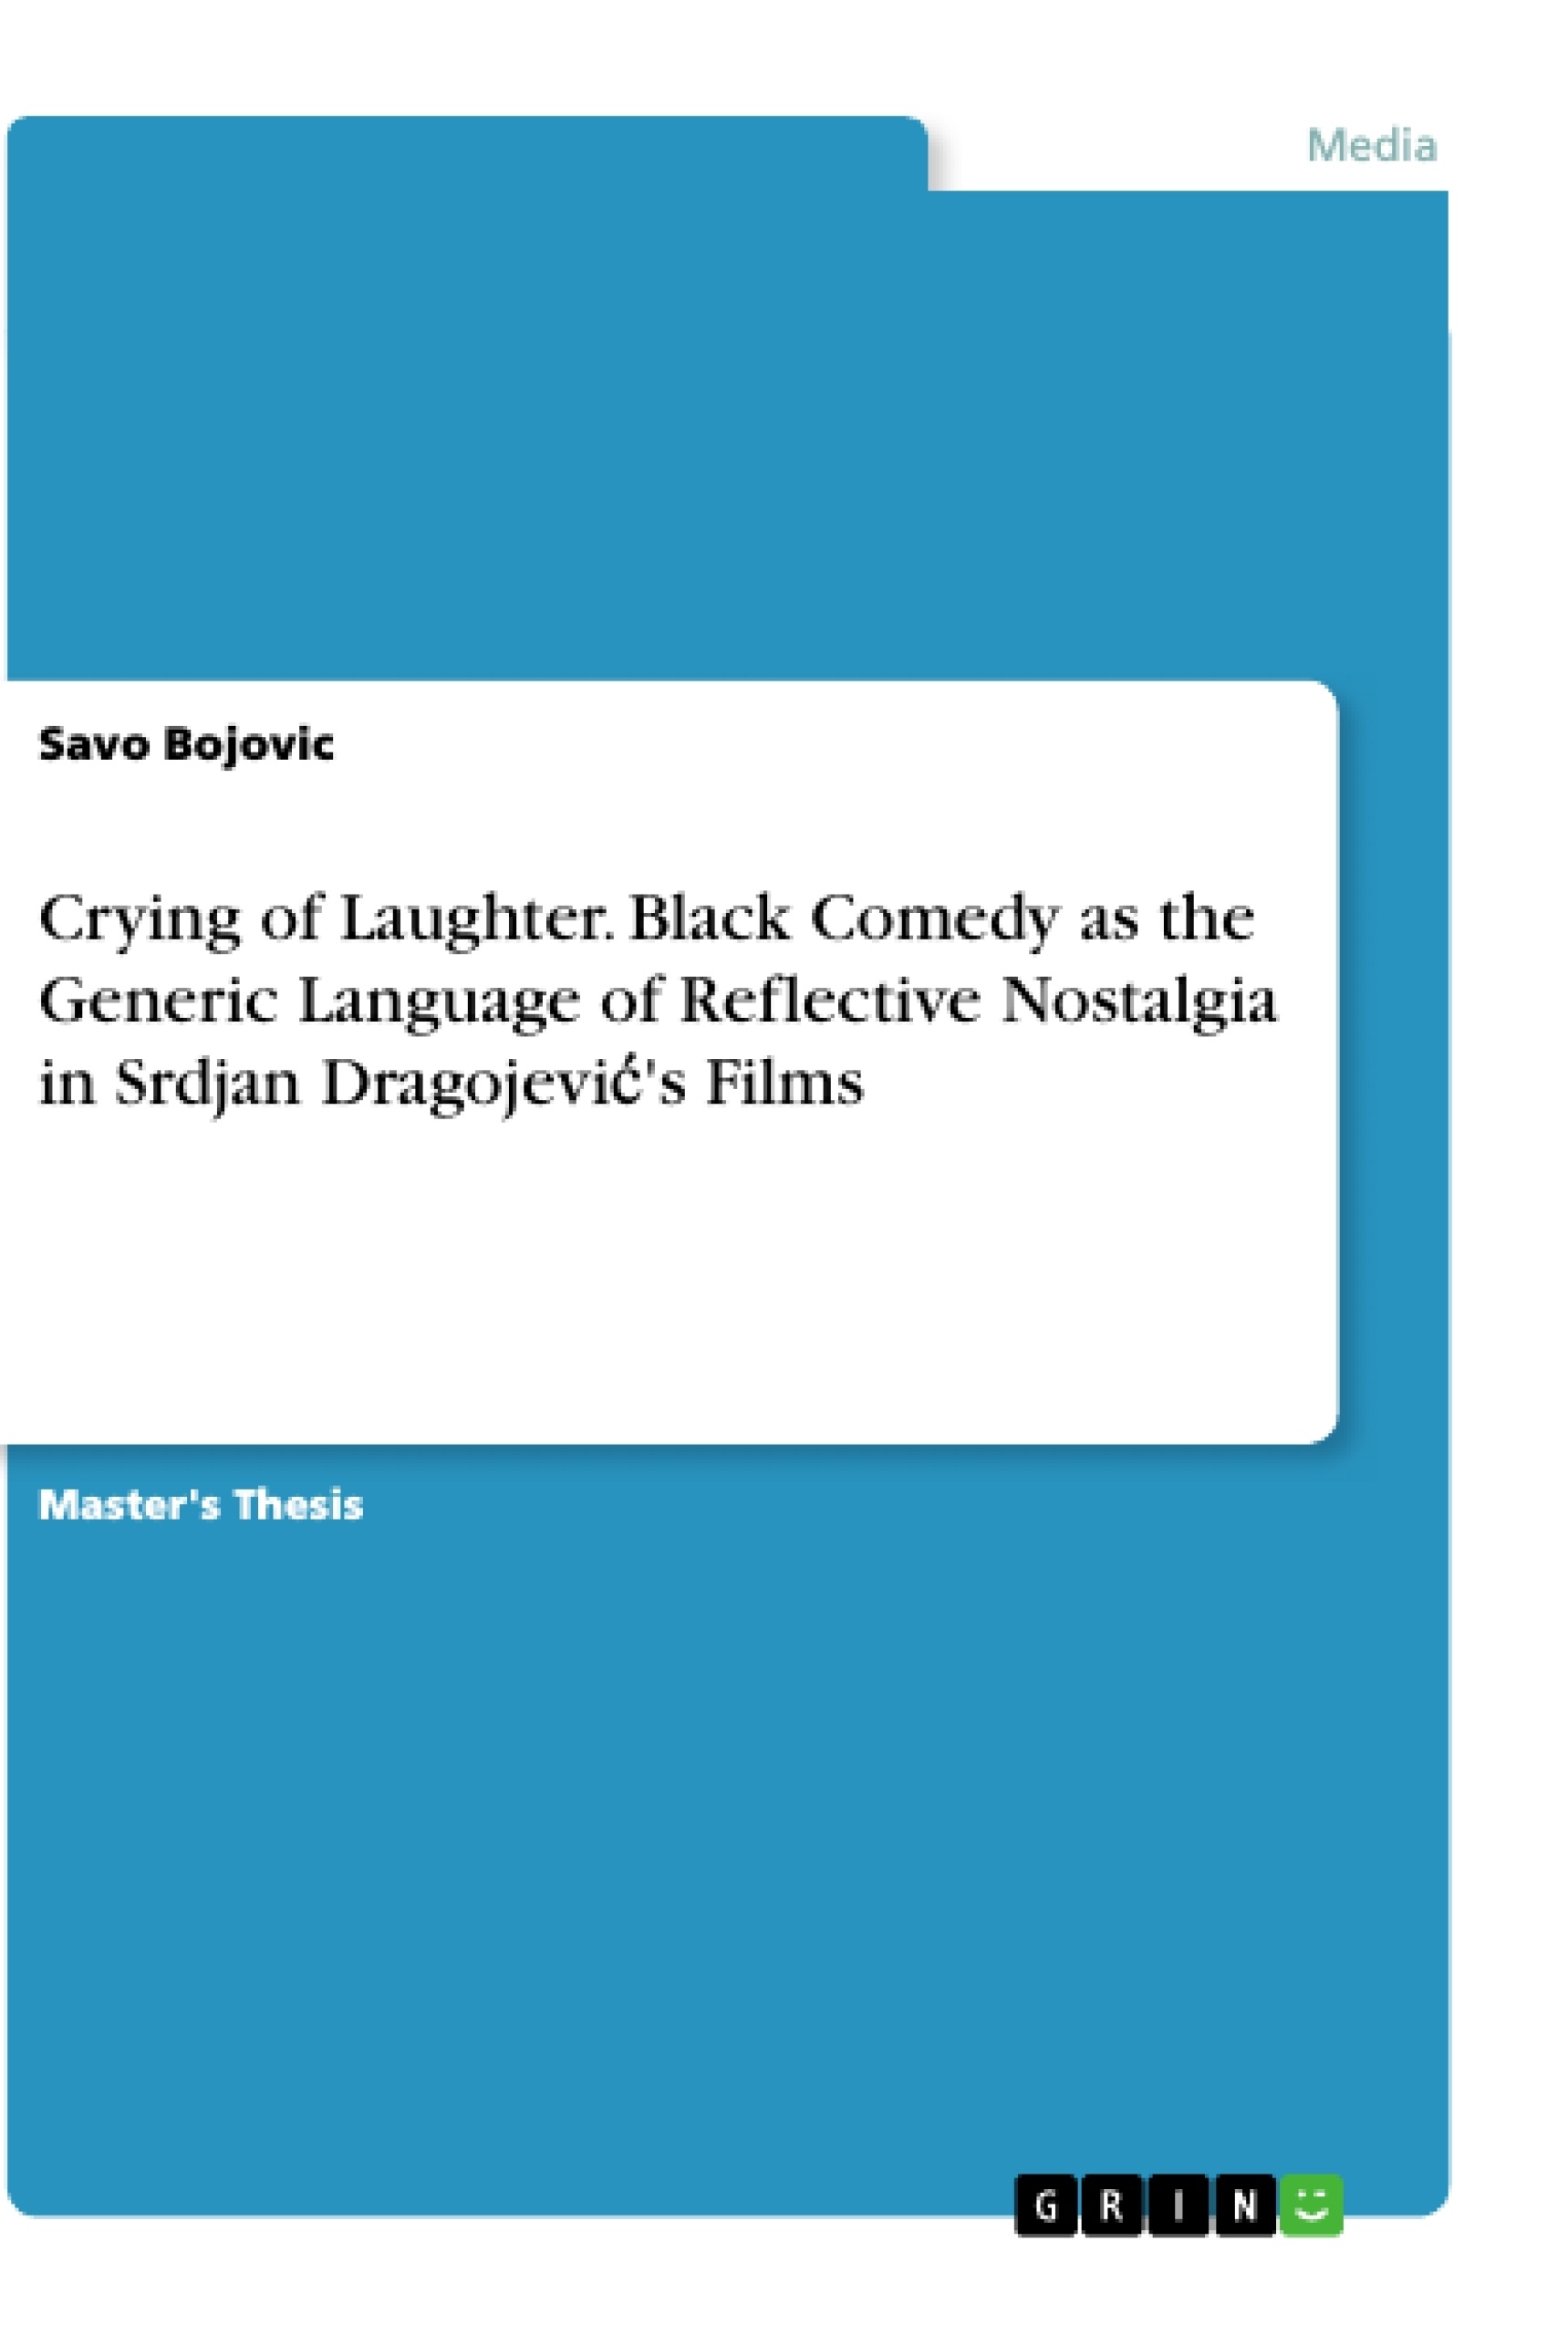 Title: Crying of Laughter. Black Comedy as the Generic Language of Reflective Nostalgia in Srdjan Dragojević's Films